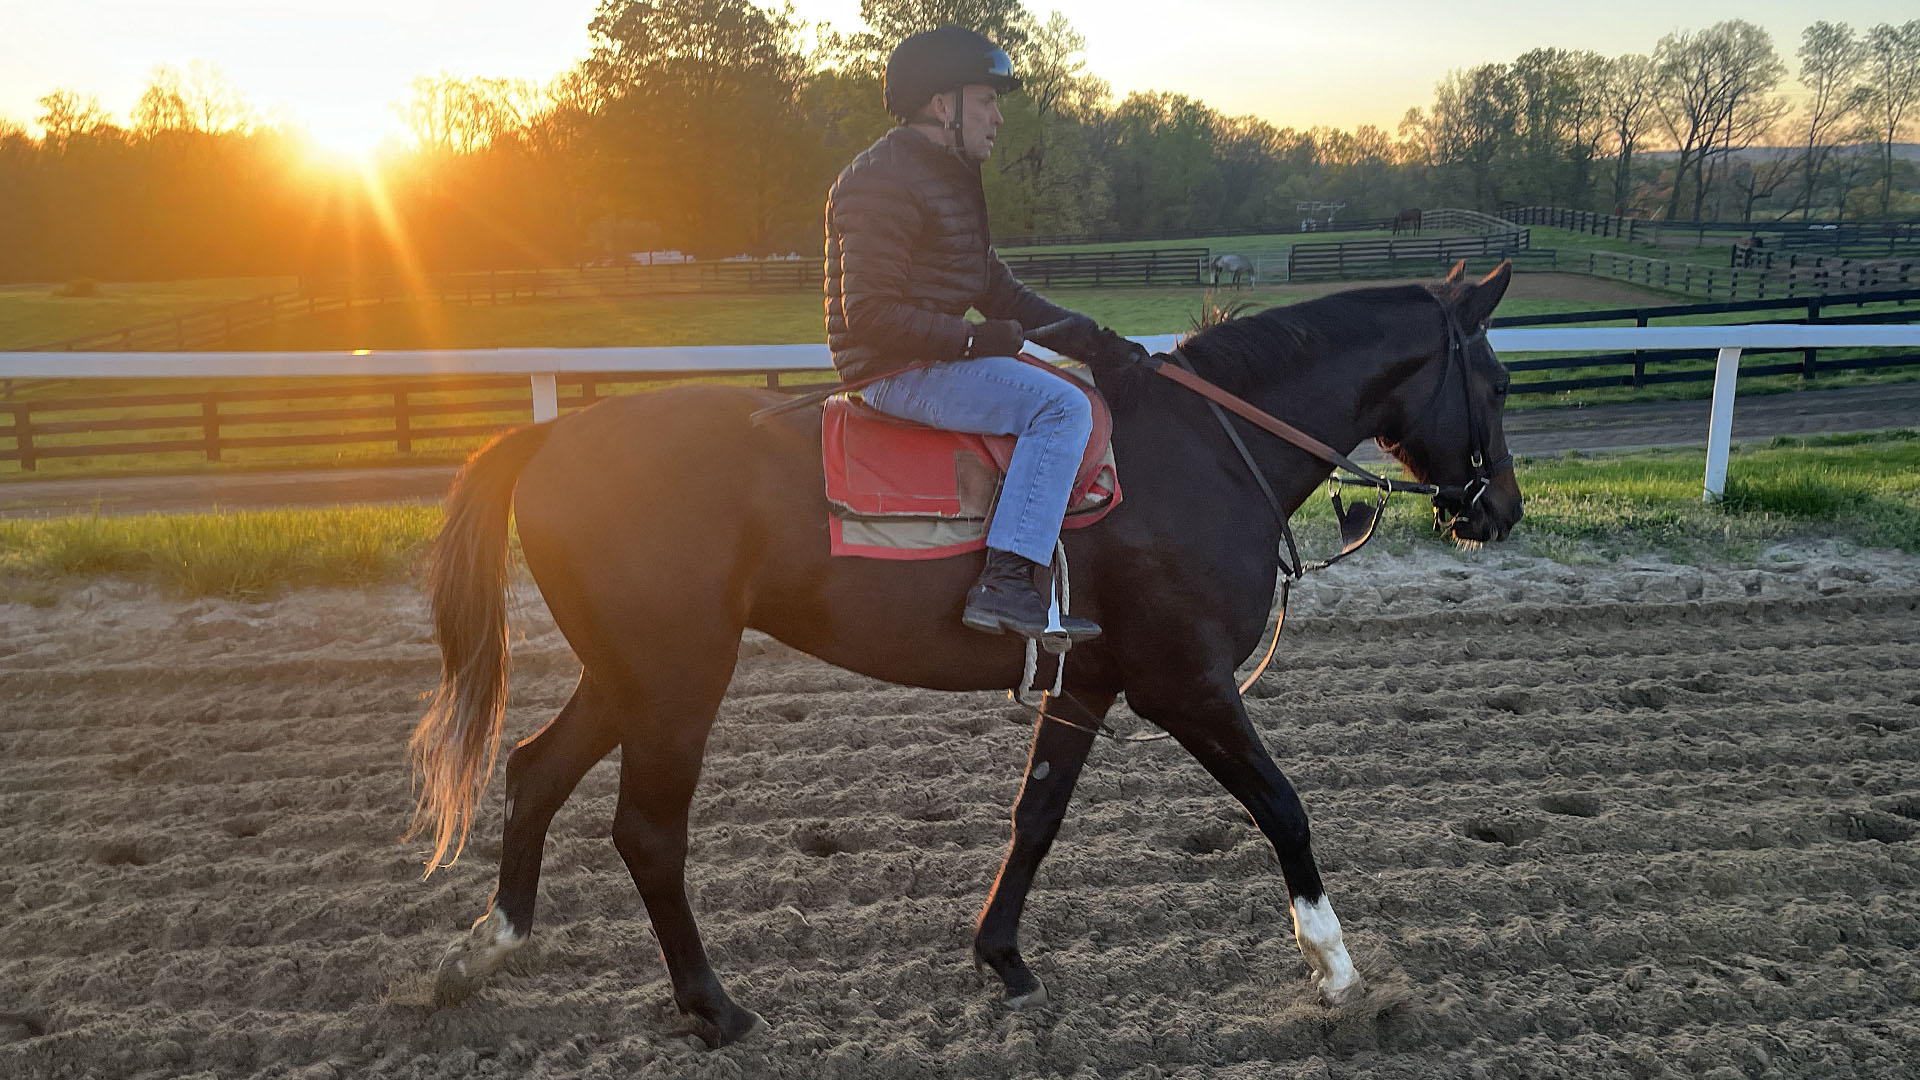 Tiz the Law colt out of Katie's Keepsake, by Medaglia d'Oro, purchased at the prestigious Keeneland September Sale and available in a thoroughbred racing partnership as the 2023 Gold Star, LLC. Pictured at the Middleburg Training Center.